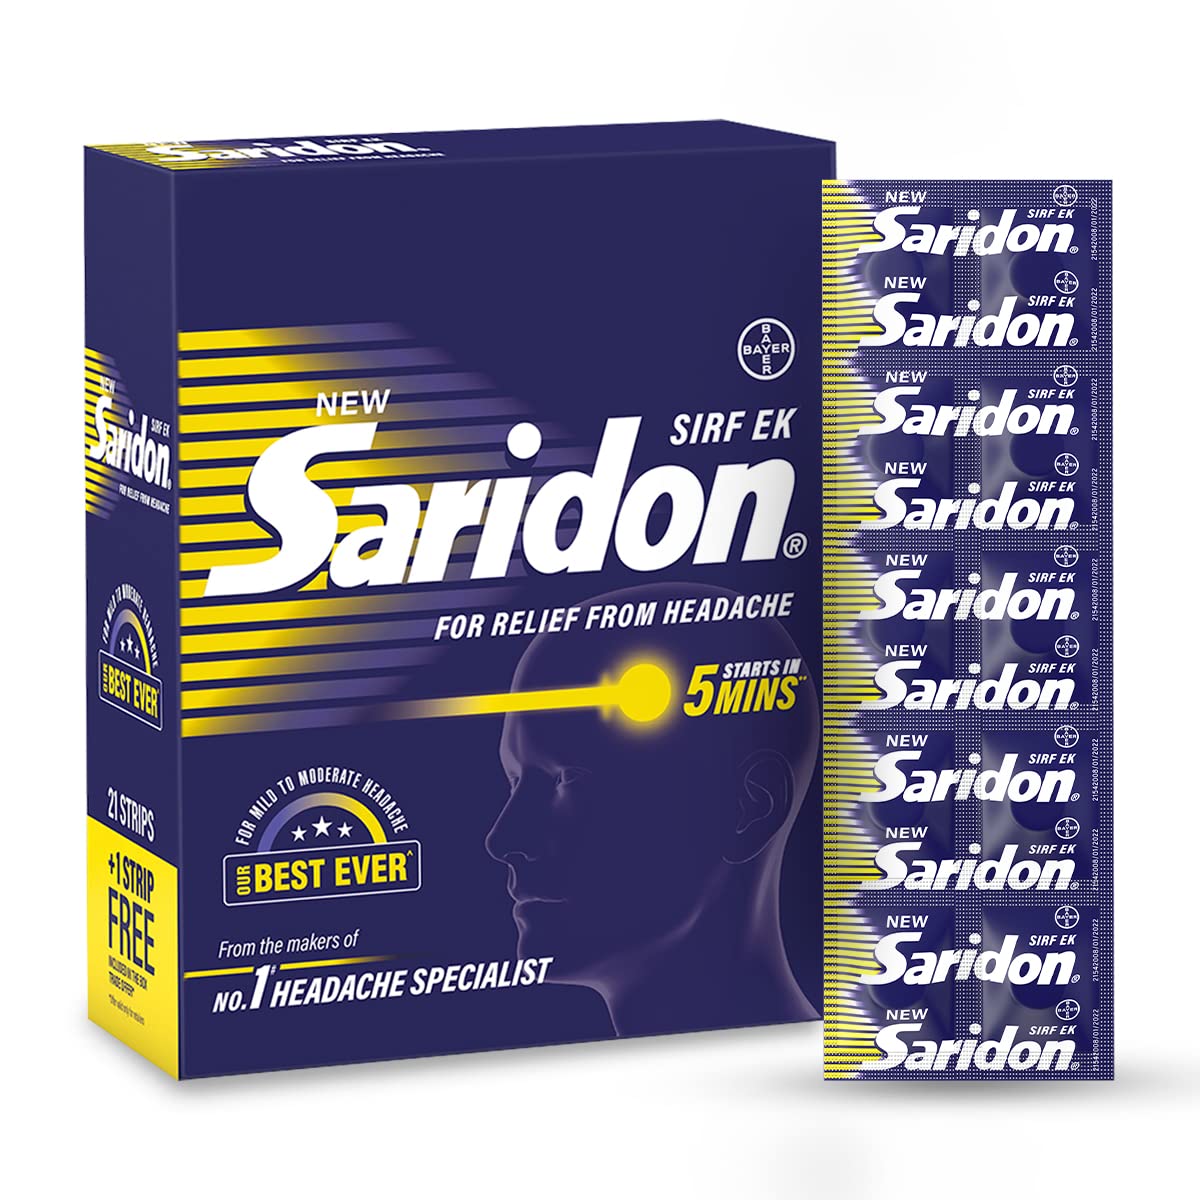 Saridon New No 1 Headache Relief Specialist 10 Tablets X Pack Of 10